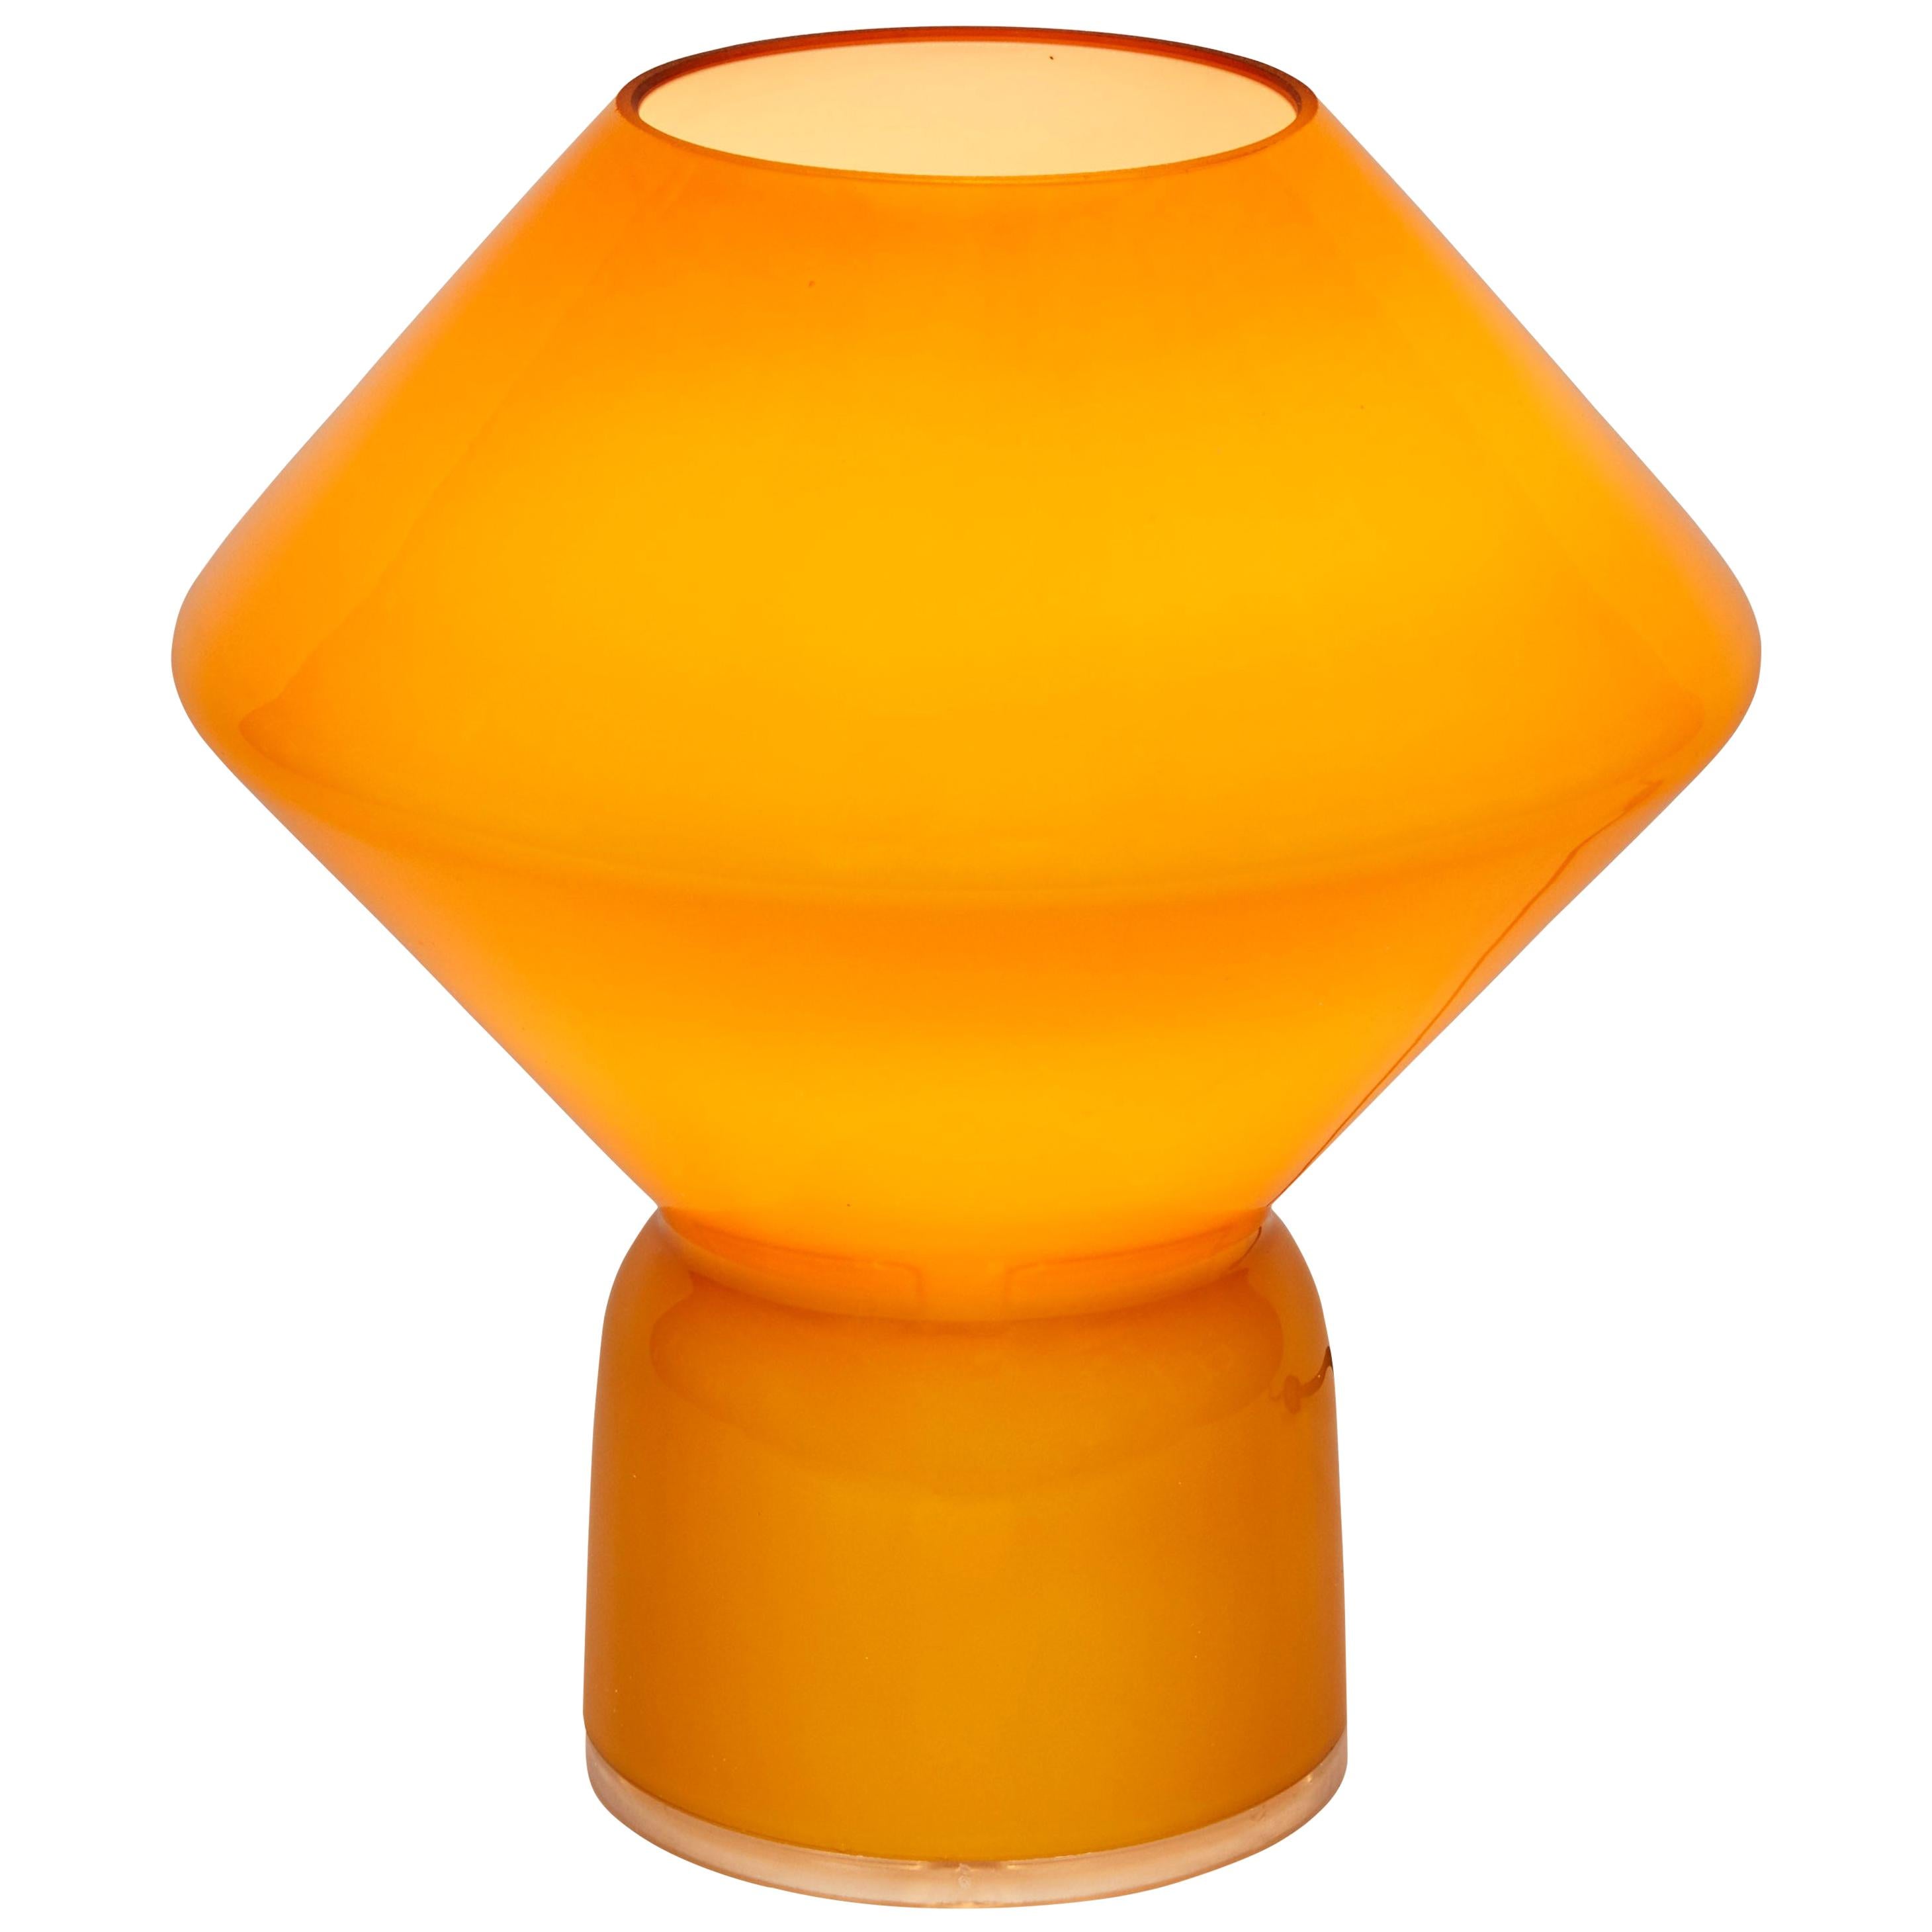 Pair of 1980s Memphis style 'Conica' table lamps for Artemide. Retains original manufacturer's sticker and factory box. Designed by Alessandro Mendini. Handcrafted in Murano amber glass, this petite lamp is strongly associated with the 1980s Memphis